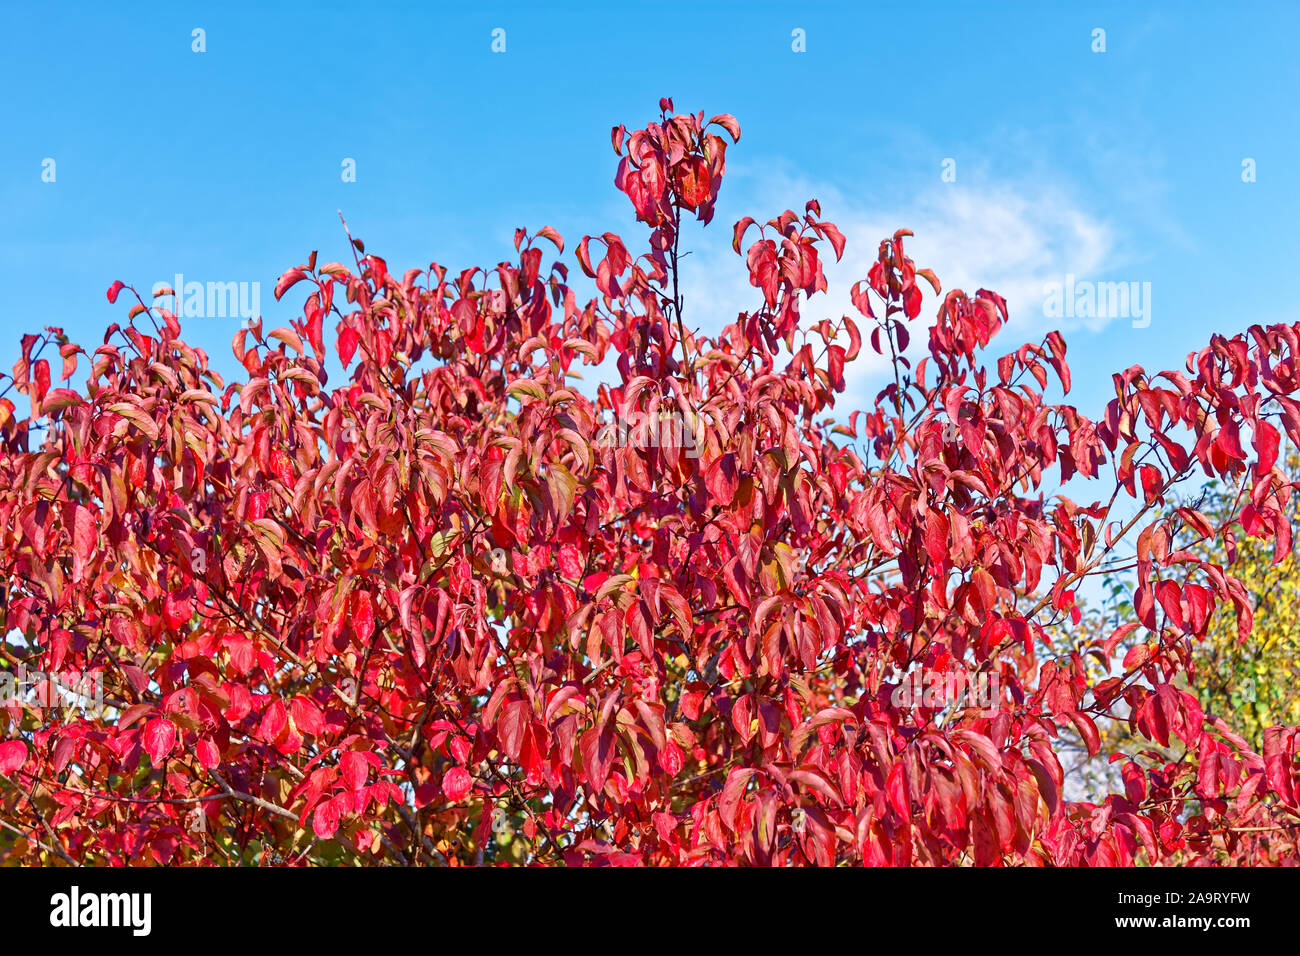 Bushes with red leaves of Cornus sanguinea (in Latin: Thelycrania sanguinea), the common dogwood in autumn on the background of blue sky Stock Photo